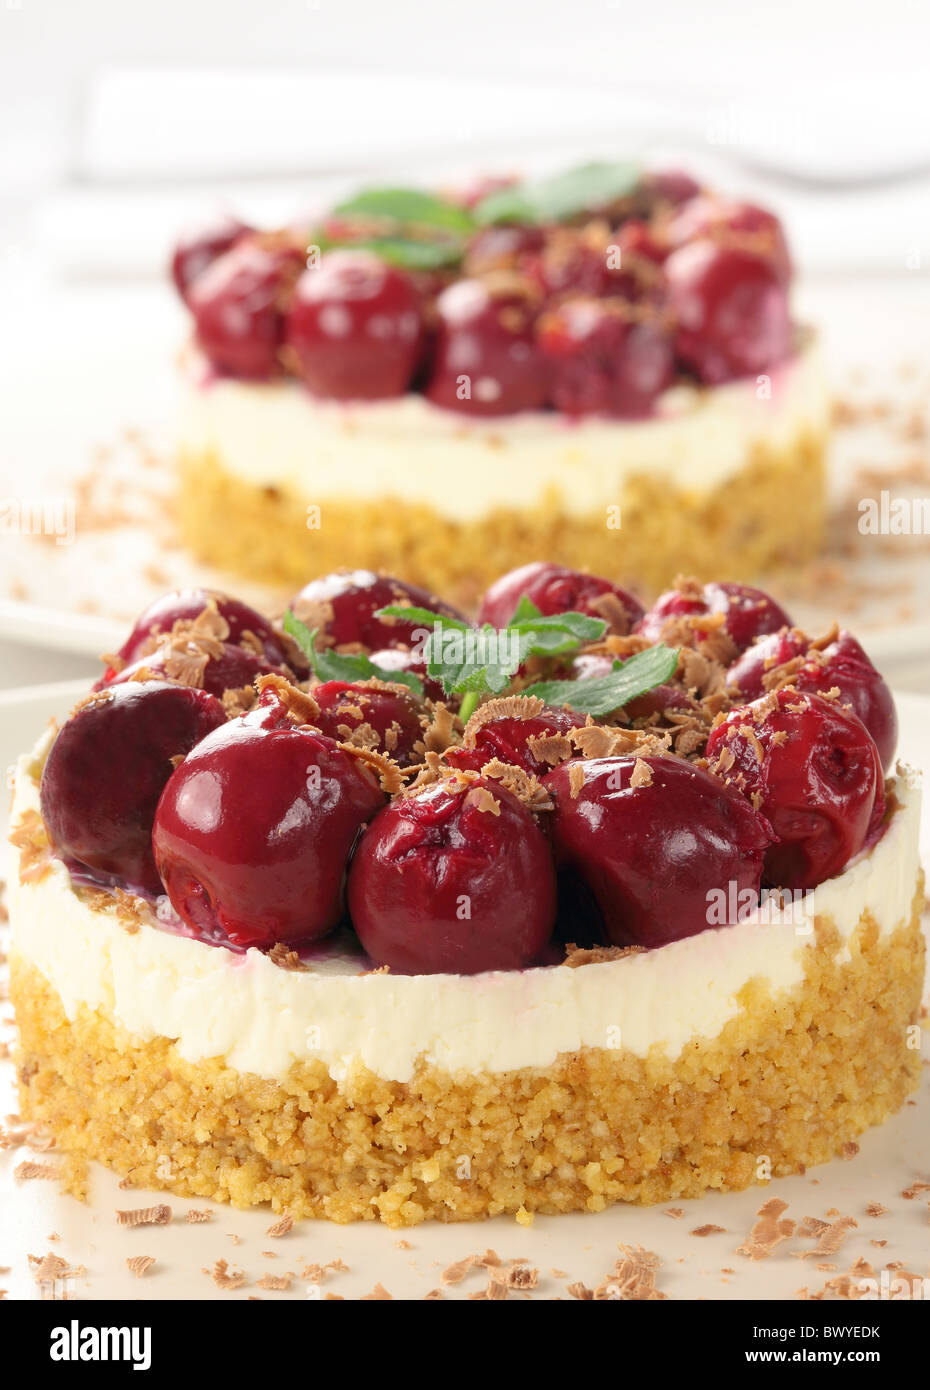 Cherry Cheesecake Banque D'Images